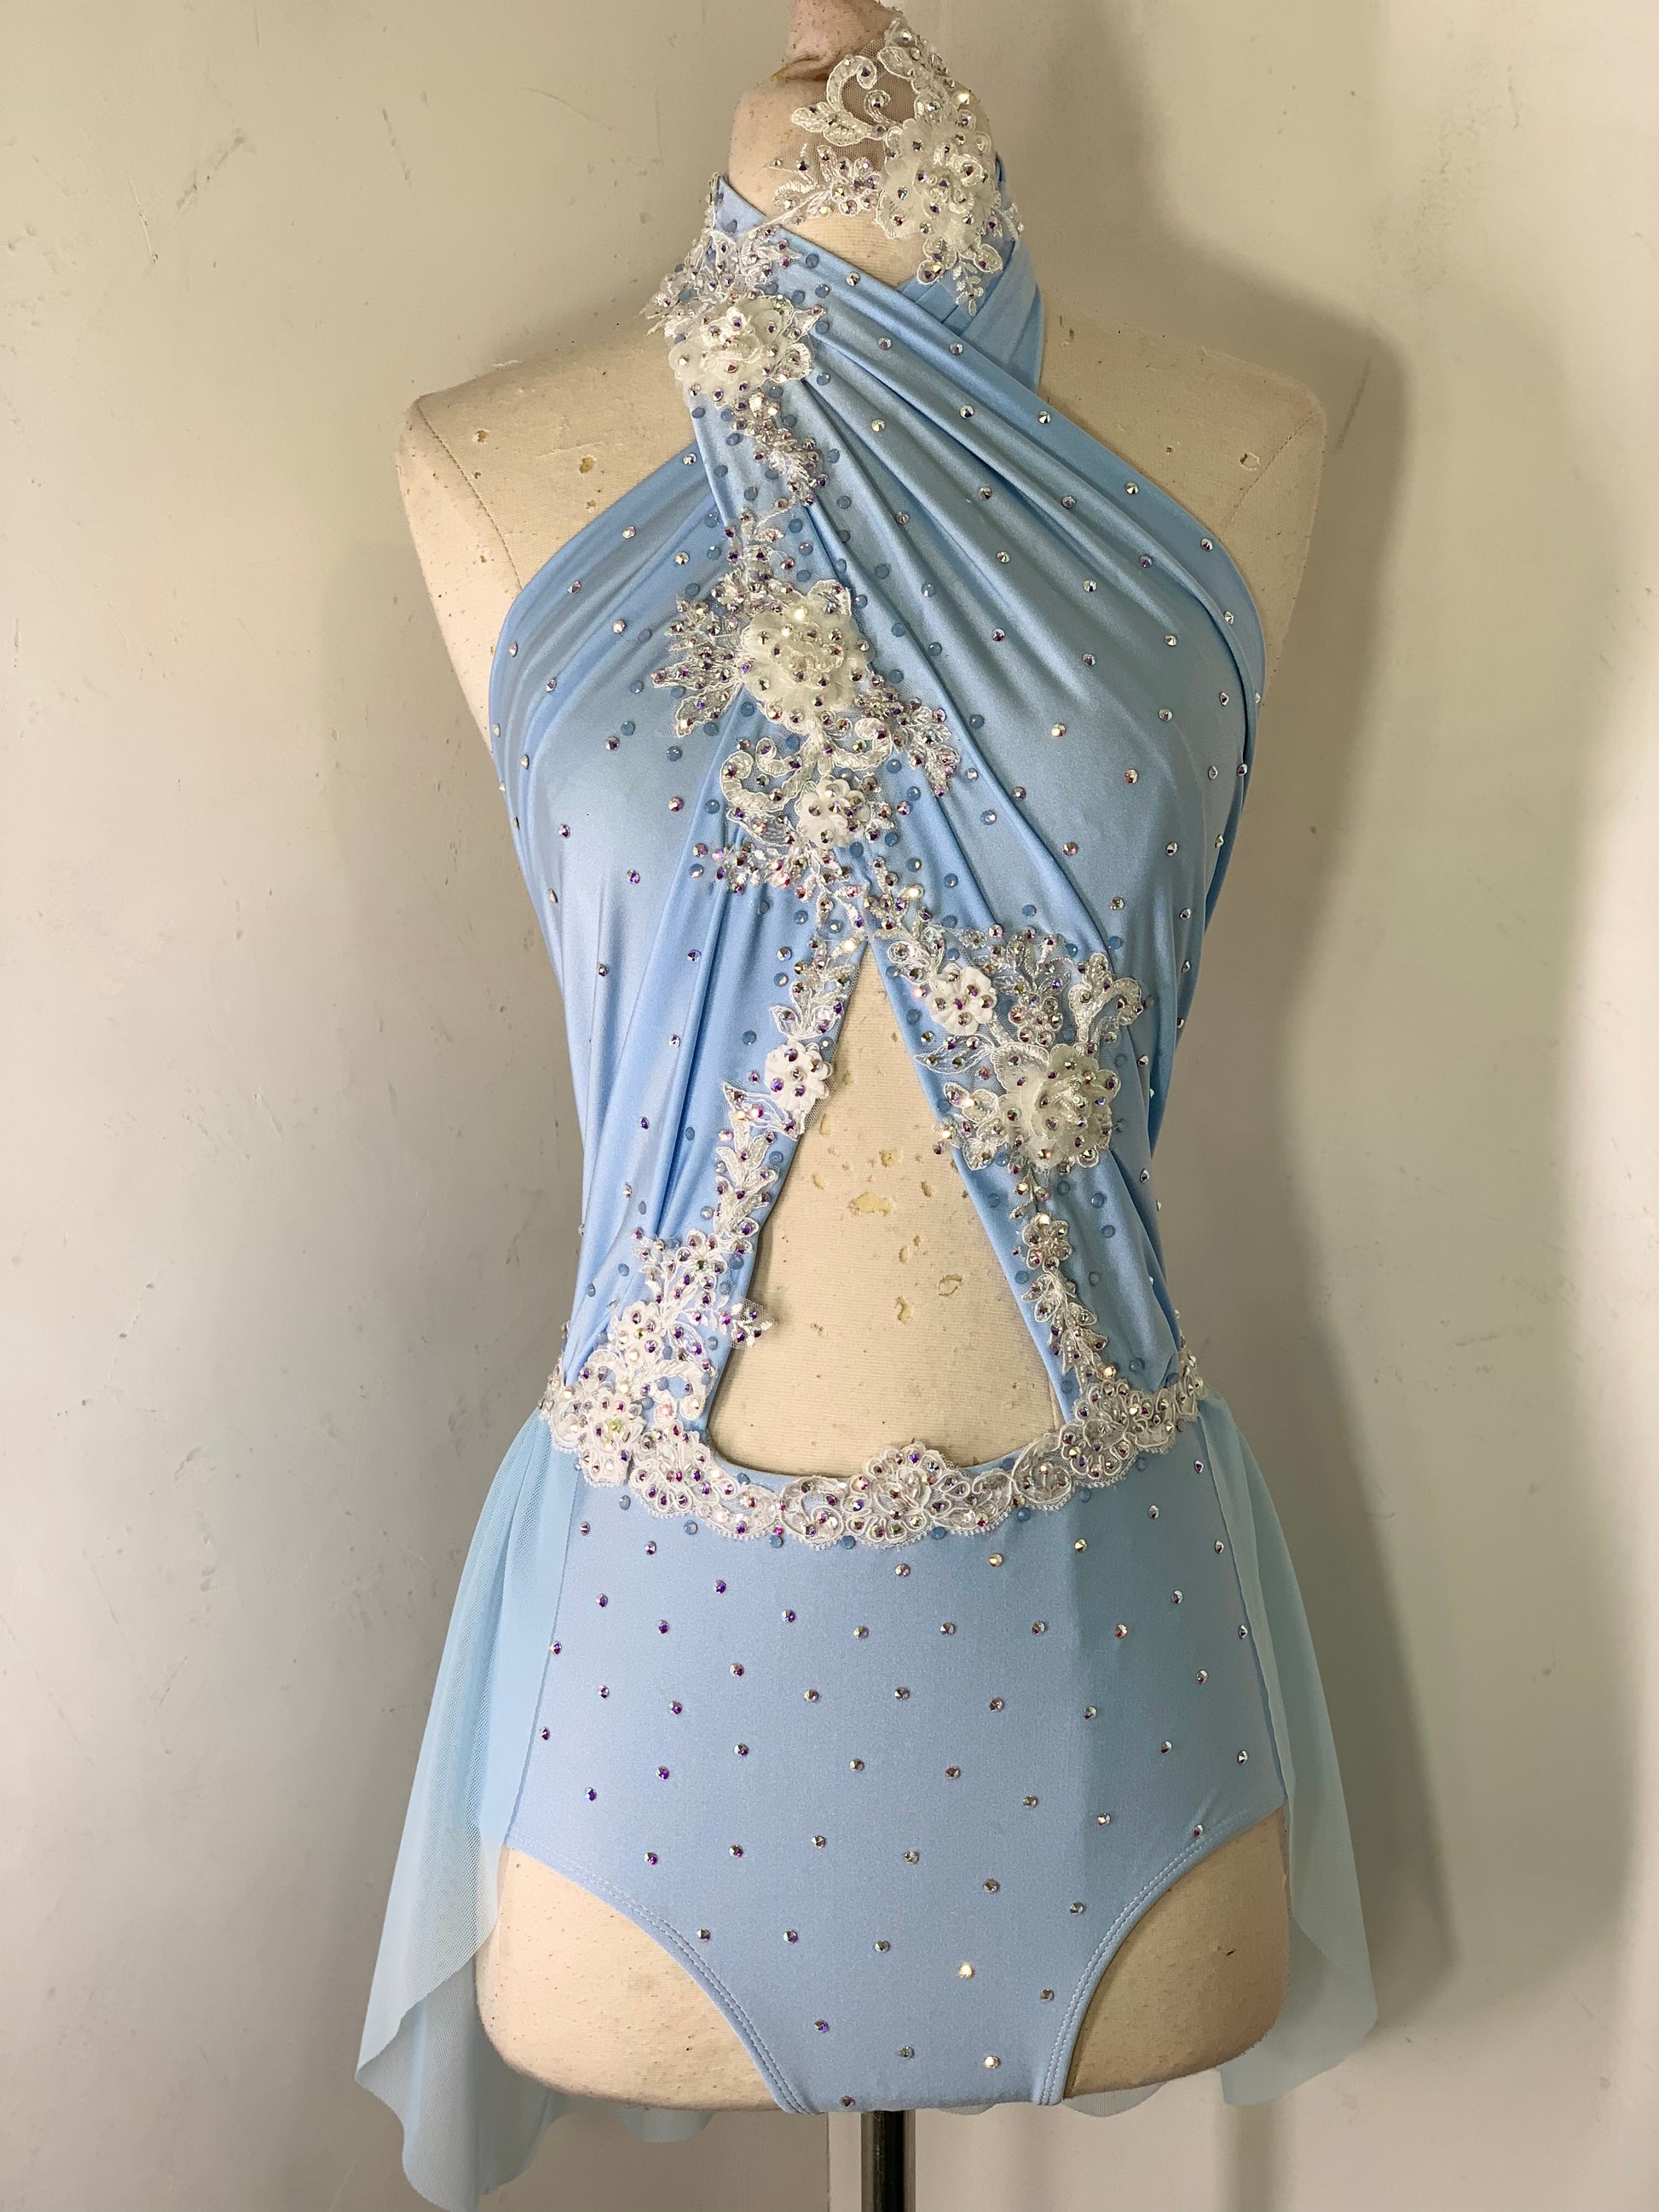 Appliqued sky blue halter dance costume READY TO SHIP – Co9dancecostumes